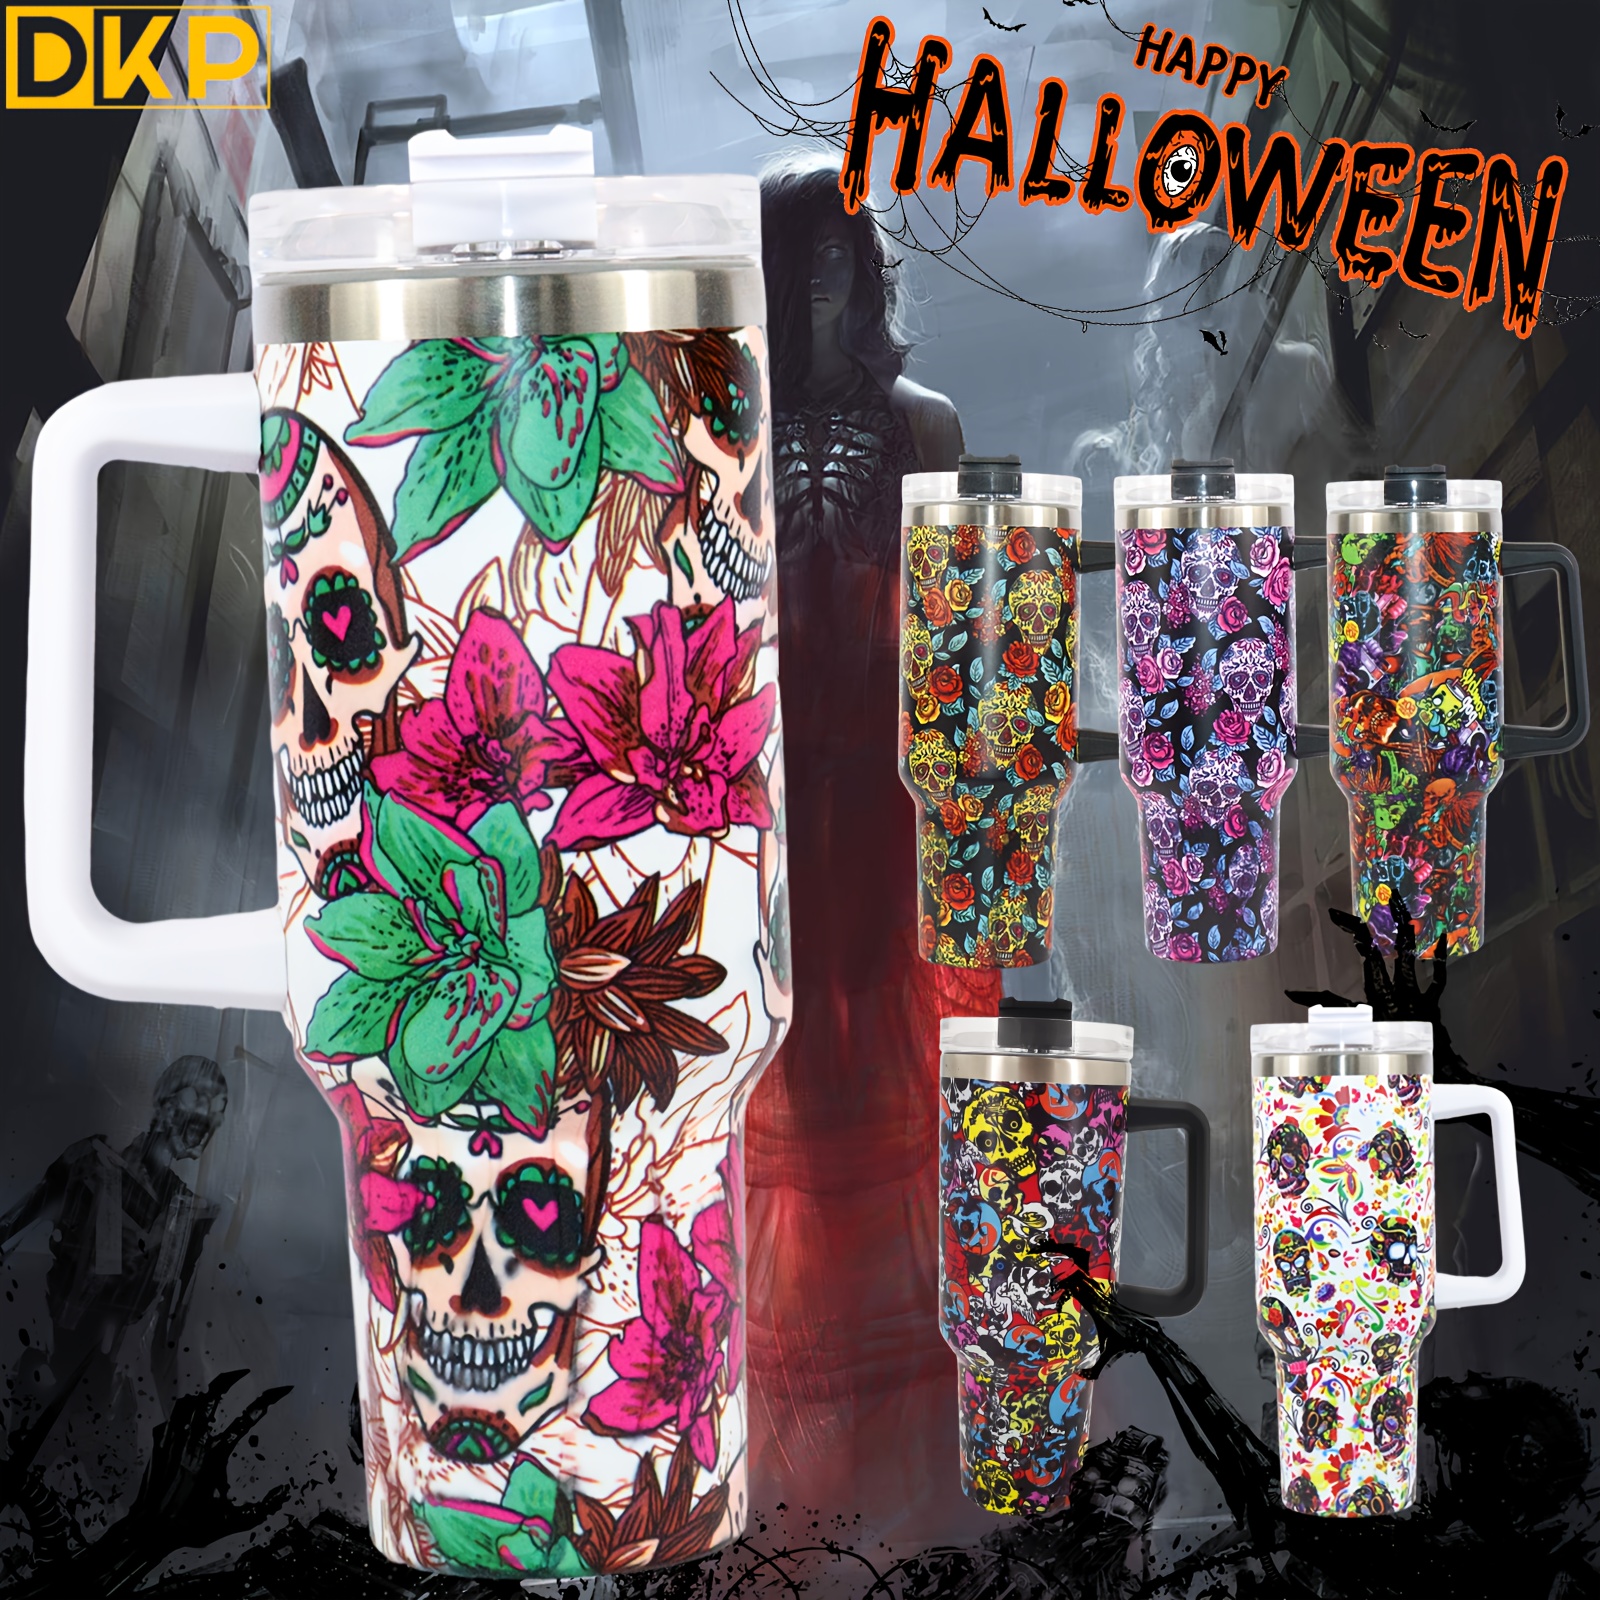 Cannabis Skulls Tumbler Mug Gifts, 20oz Insulated Stainless  Steel Marijuana Tumbler Cup with Lid and Straw for Men Women: Tumblers &  Water Glasses